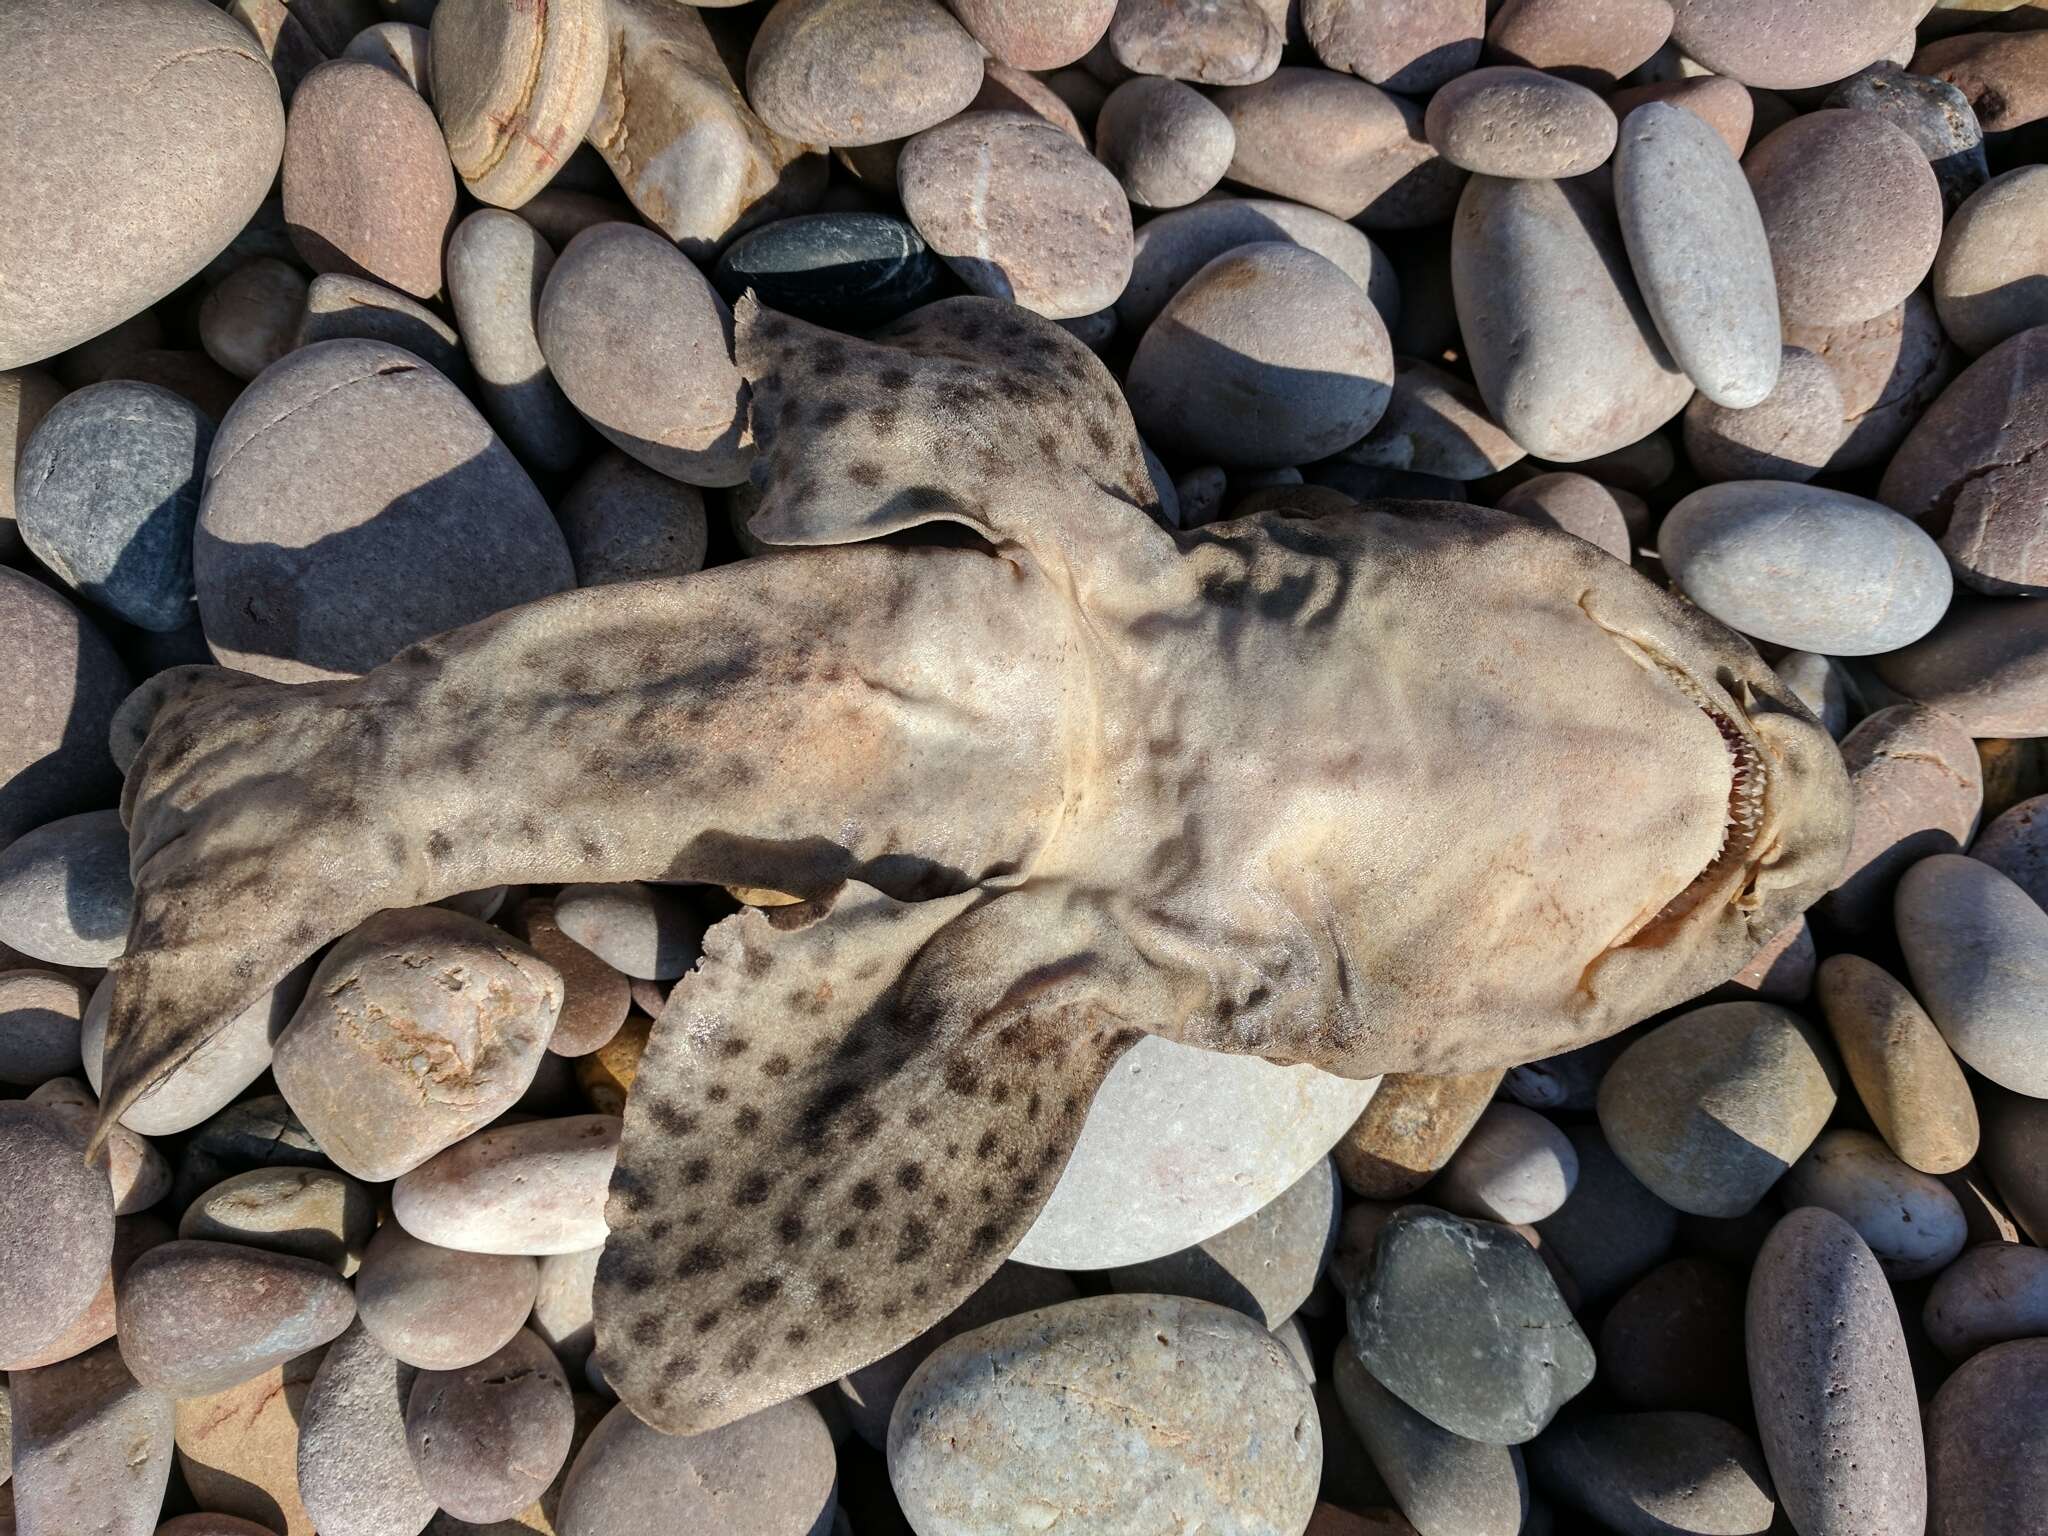 Image of Lesser Spotted Dogfish